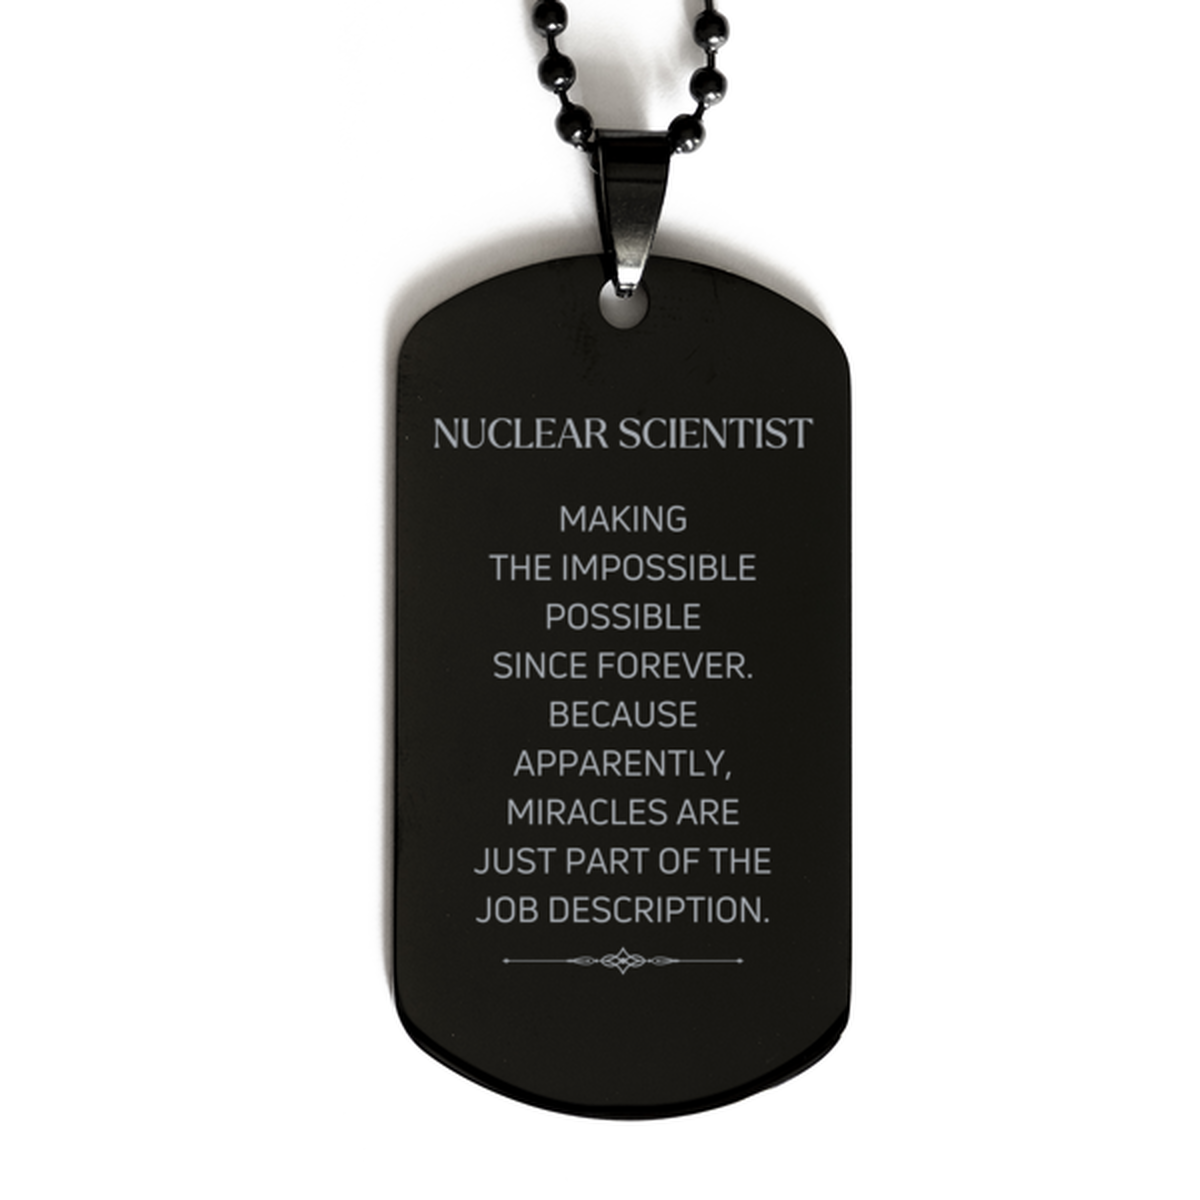 Funny Nuclear Scientist Gifts, Miracles are just part of the job description, Inspirational Birthday Black Dog Tag For Nuclear Scientist, Men, Women, Coworkers, Friends, Boss